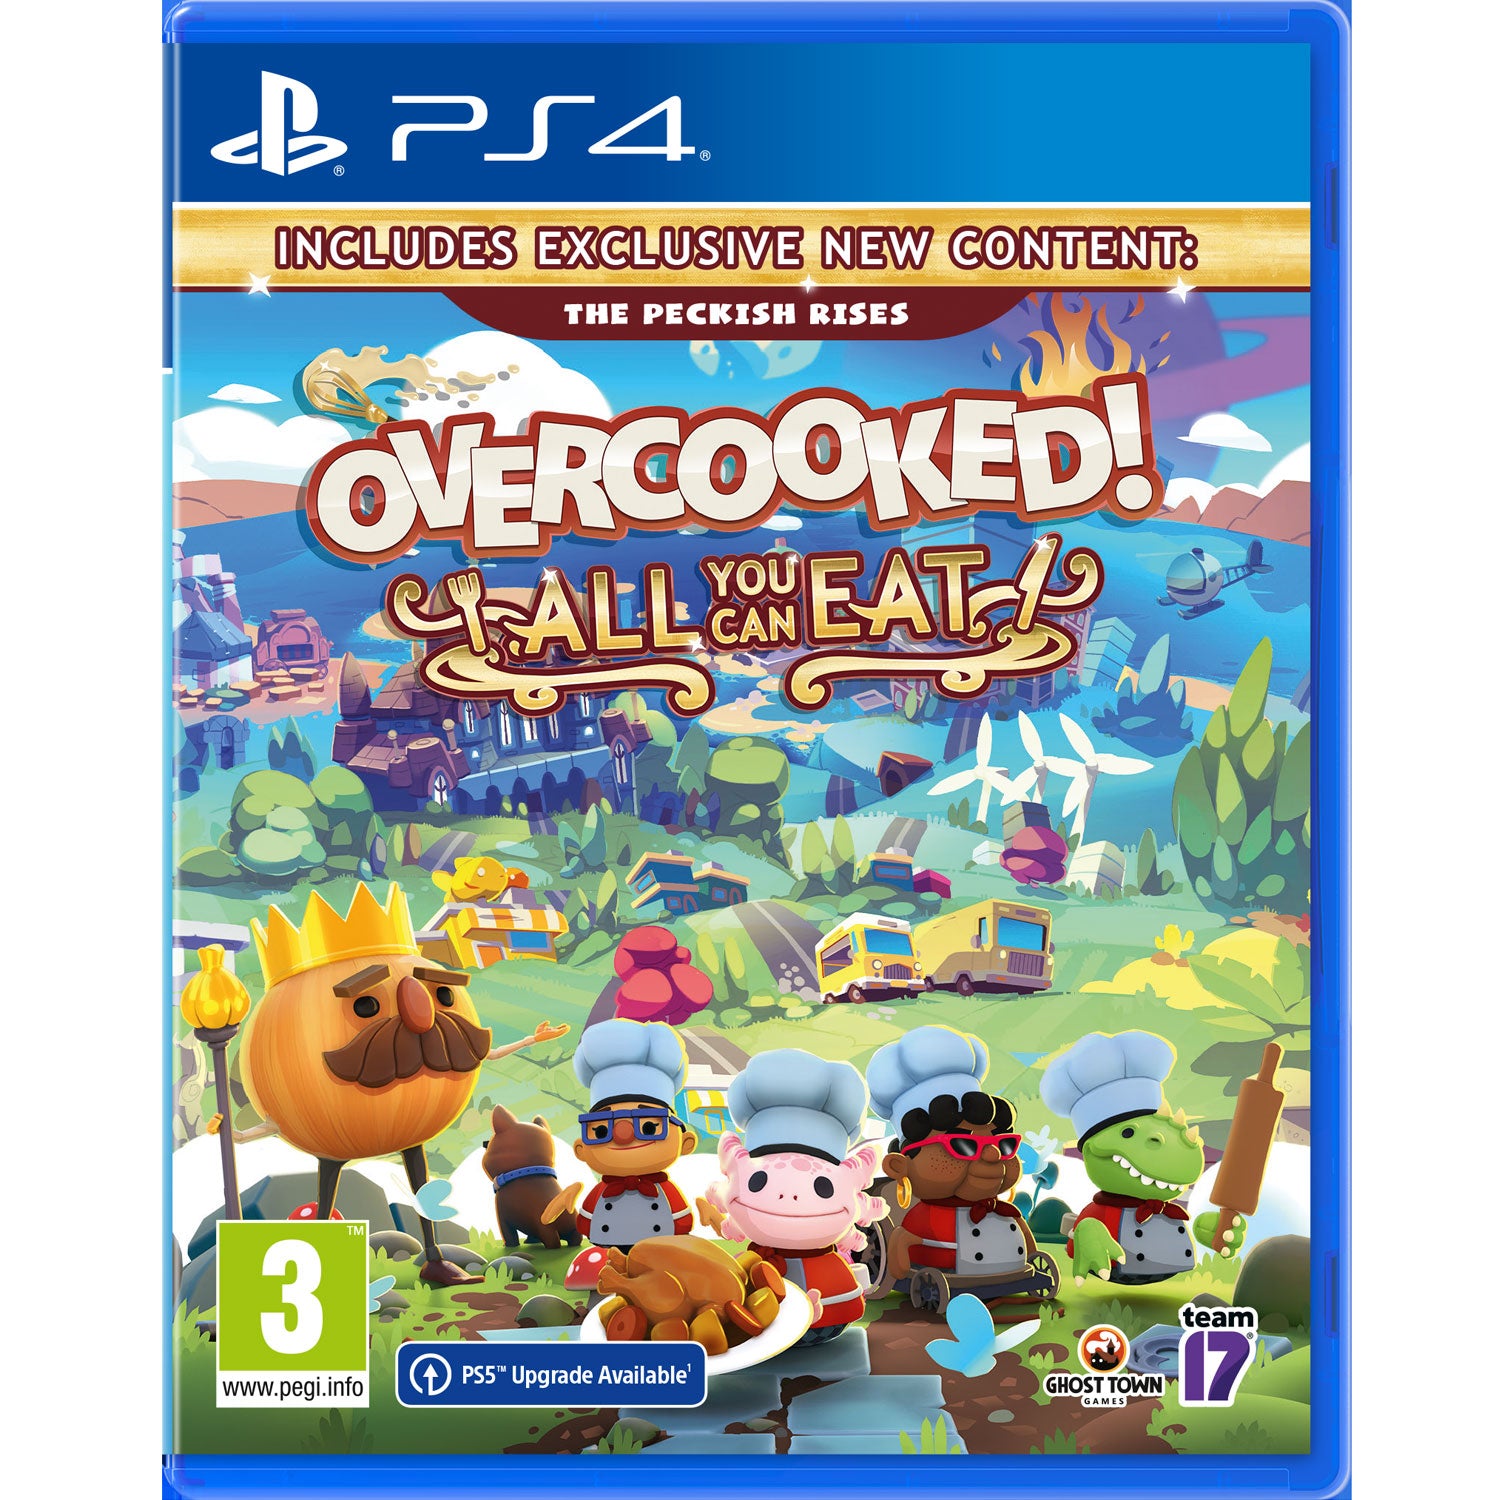 PS4 Overcooked! All You Can Eat